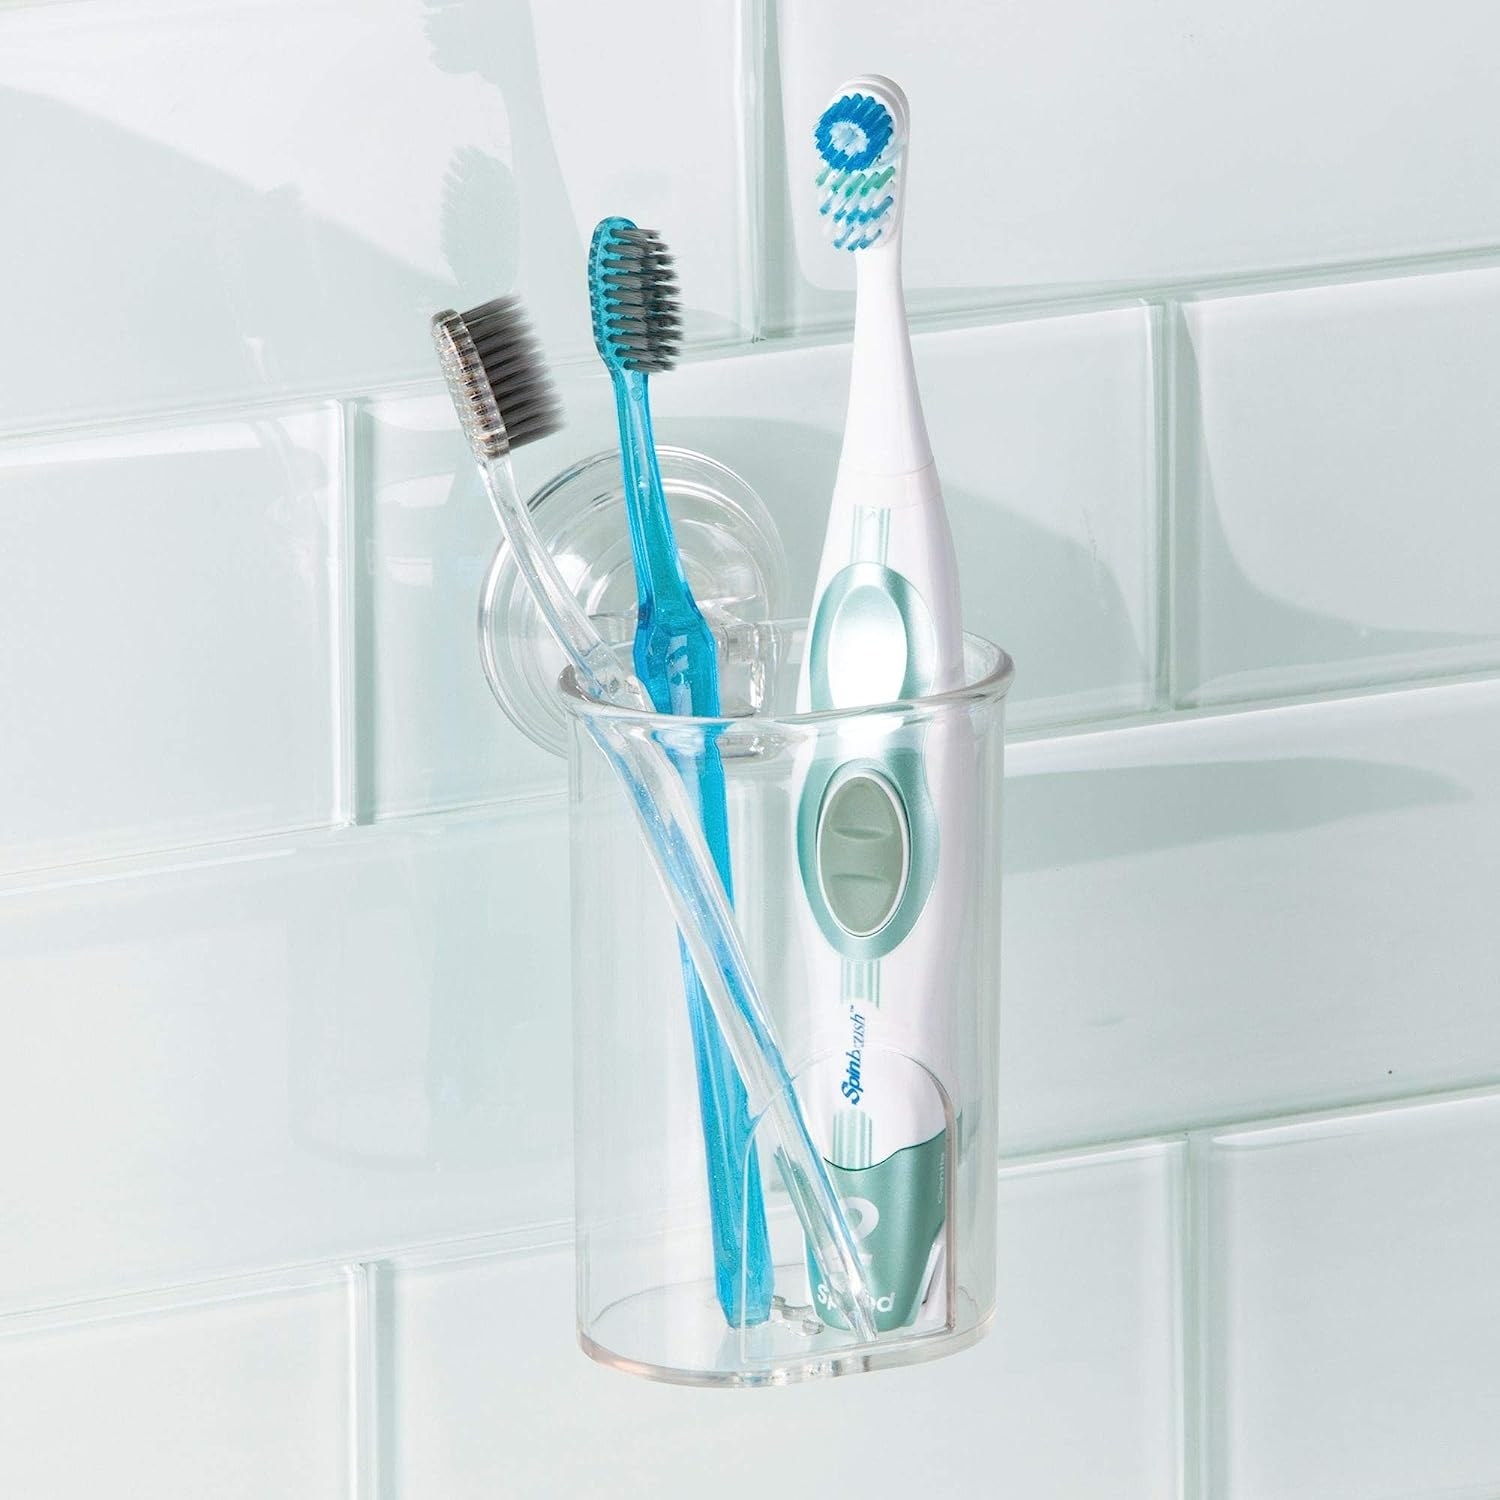 Several toothbrushes in the cup